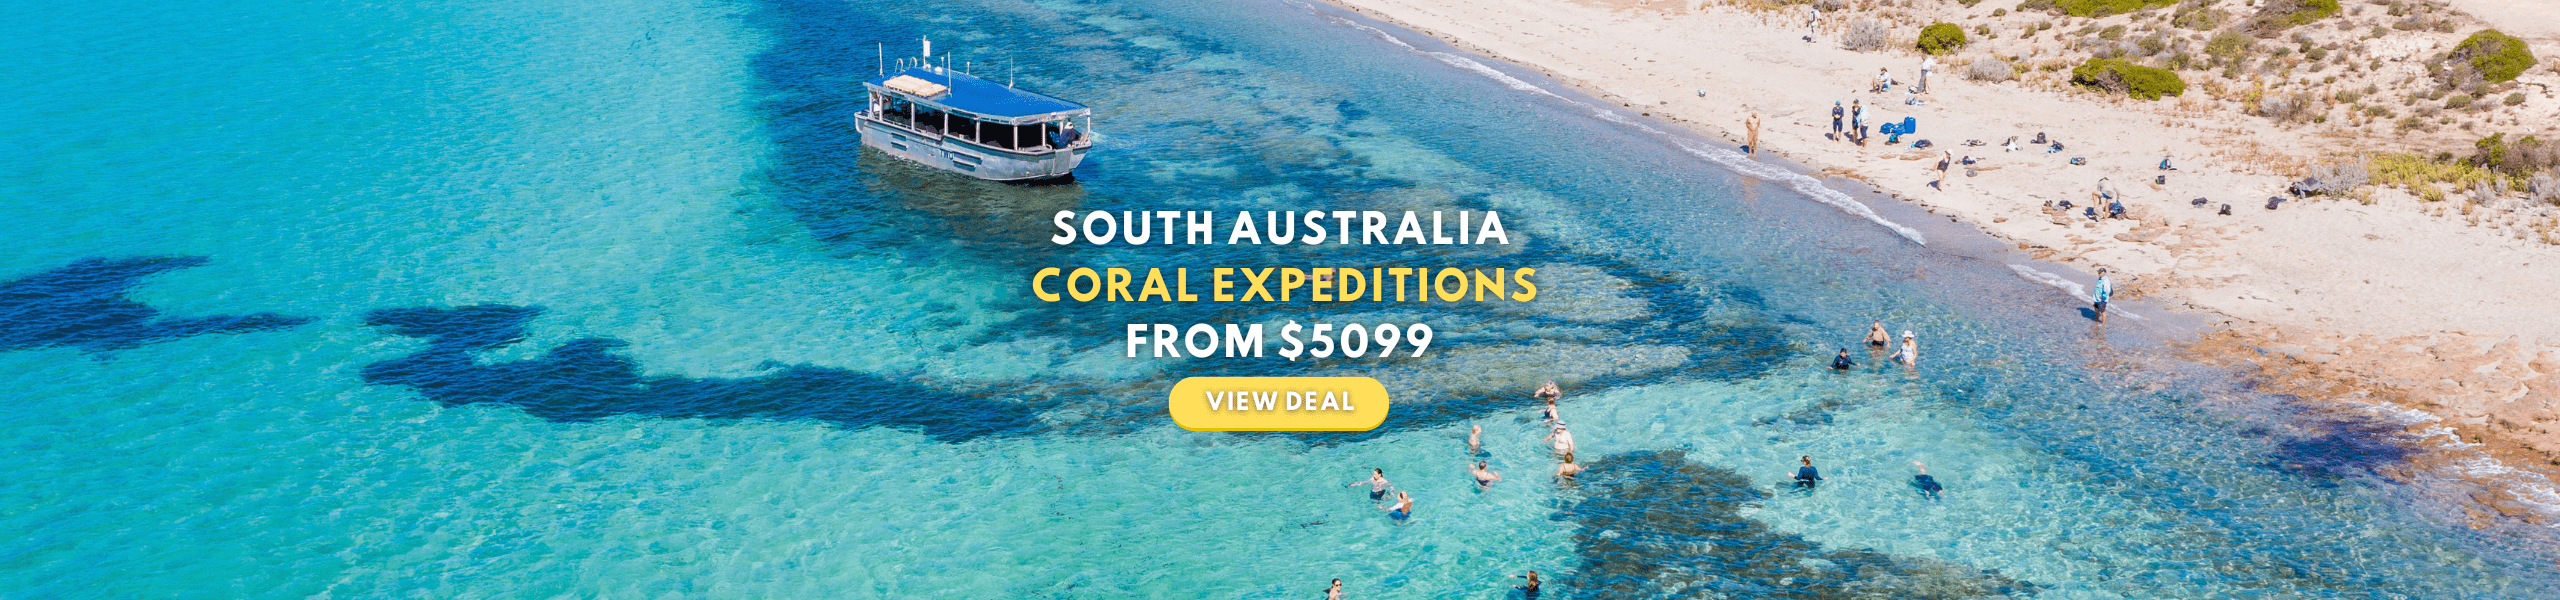 Coral Expeditions Wild Islands of South Australia